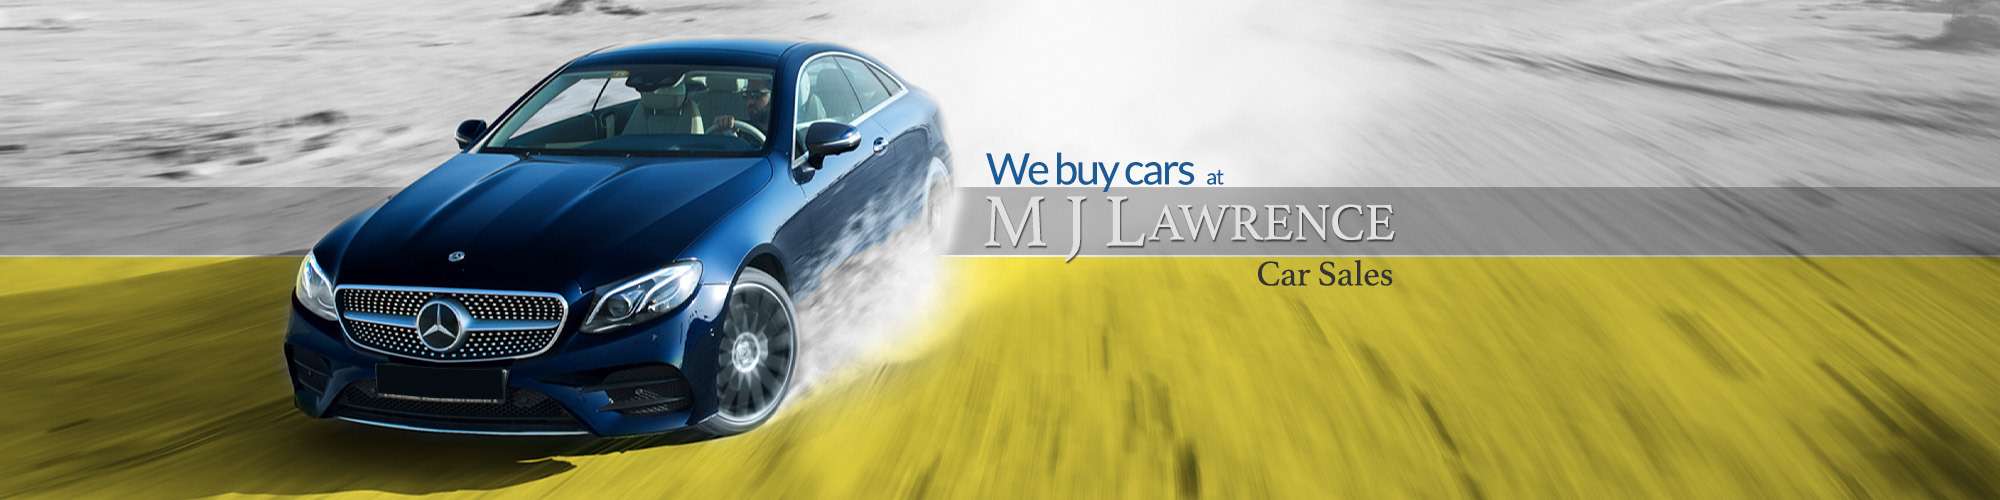 Sell Your Vehicle at M J Lawrence Car Sales, Caistor